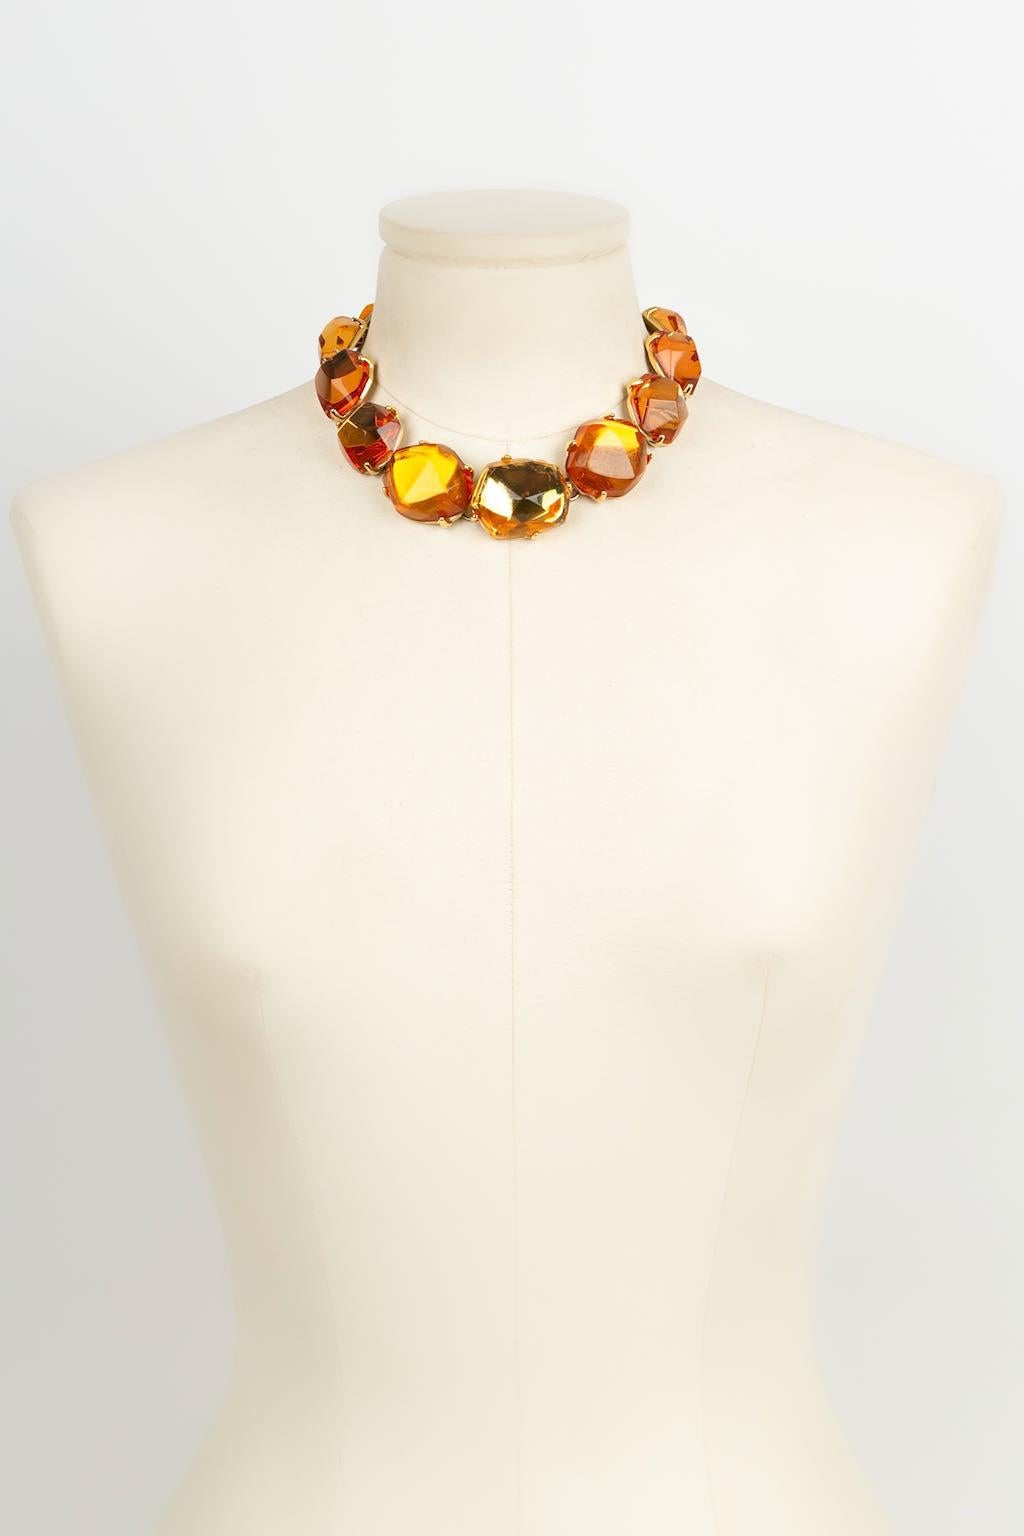 Yves Saint Laurent -(Made in France) Necklace in gold metal and orange resin.

Additional information: 
Dimensions: Length: from 39 cm to 44 cm
Condition: Good condition
Seller Ref number: BC167